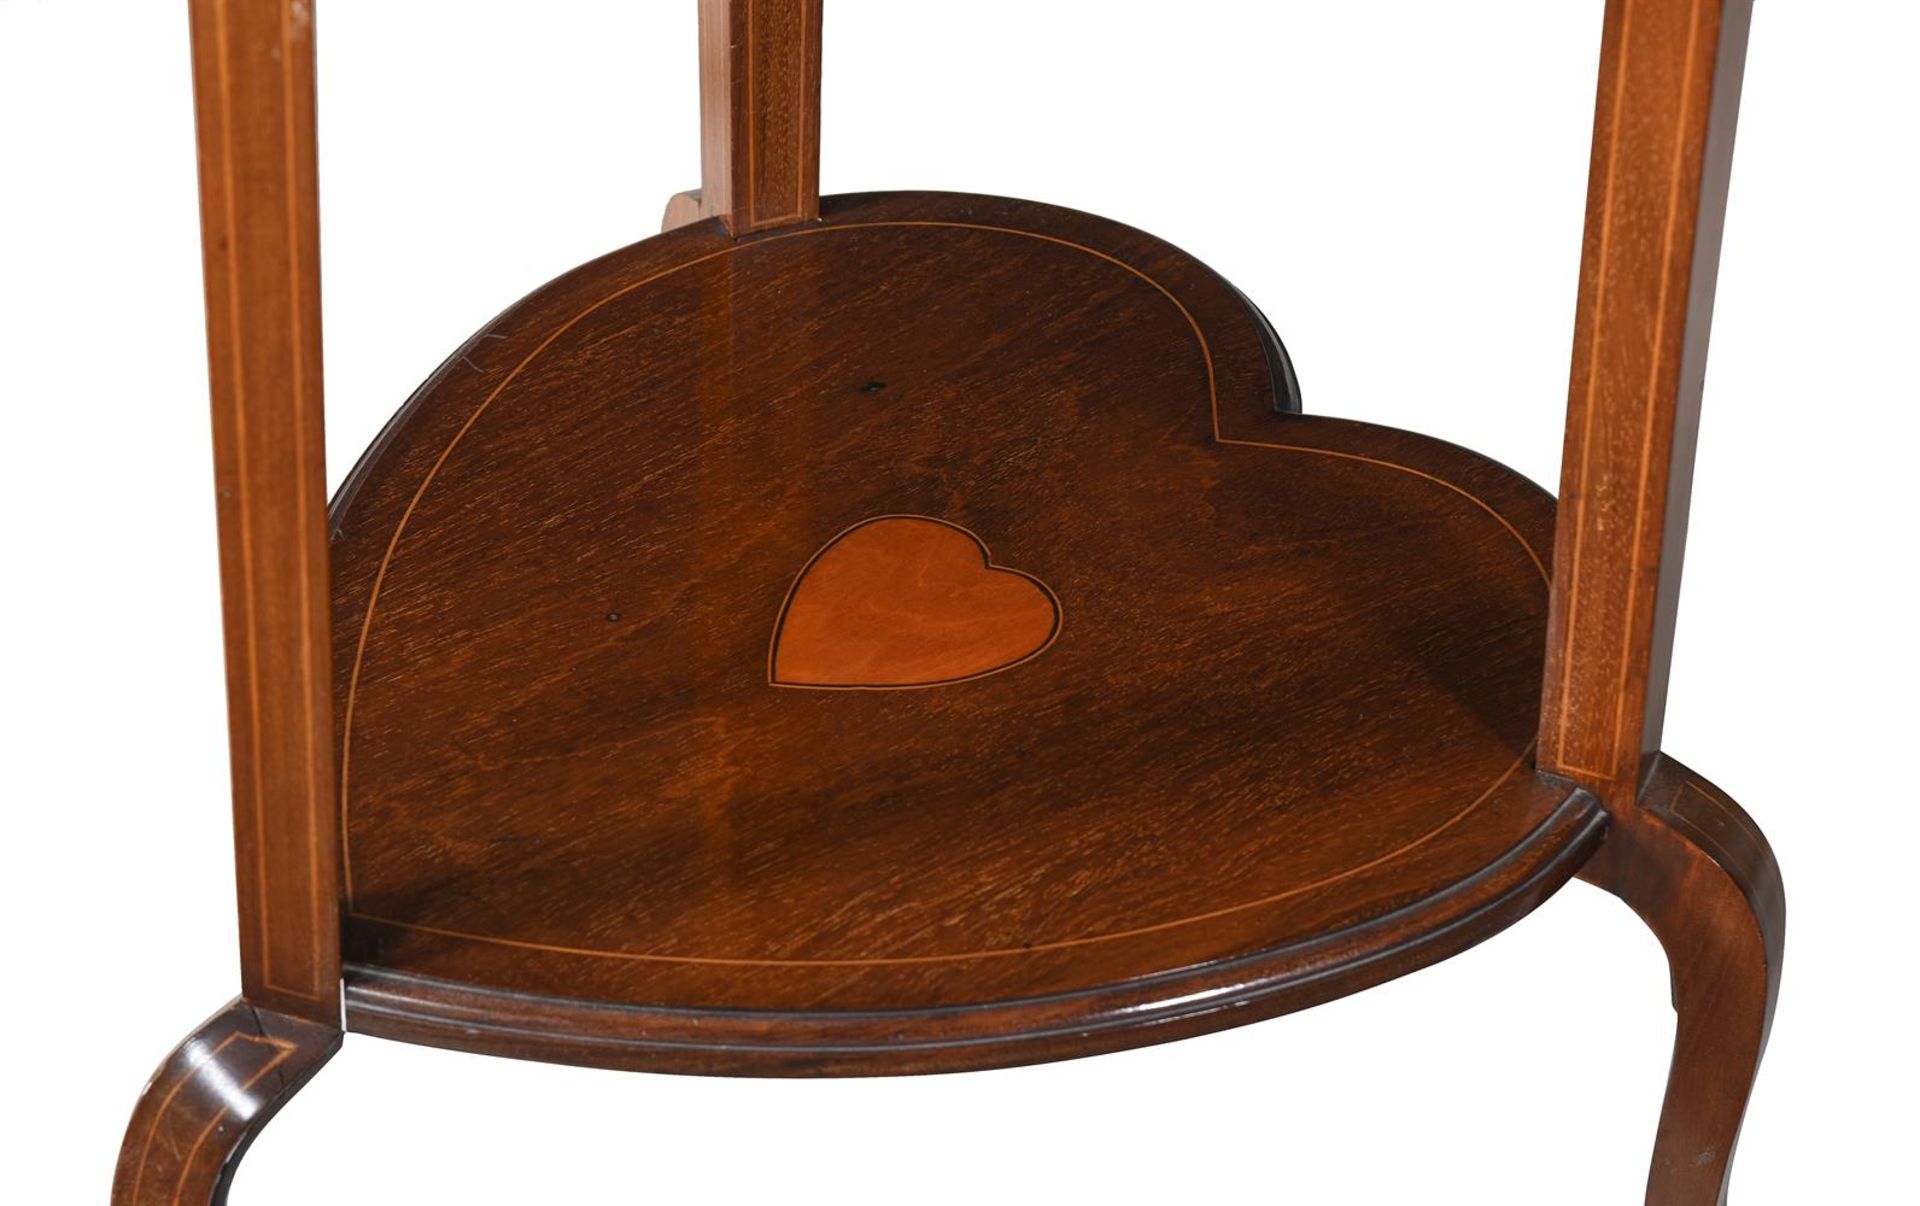 A PAIR OF EDWARDIAN MAHOGANY, SATINWOOD AND INLAID 'SHAMROCK' OR HEART SHAPED BIJOUTERIE TABLES - Image 3 of 3